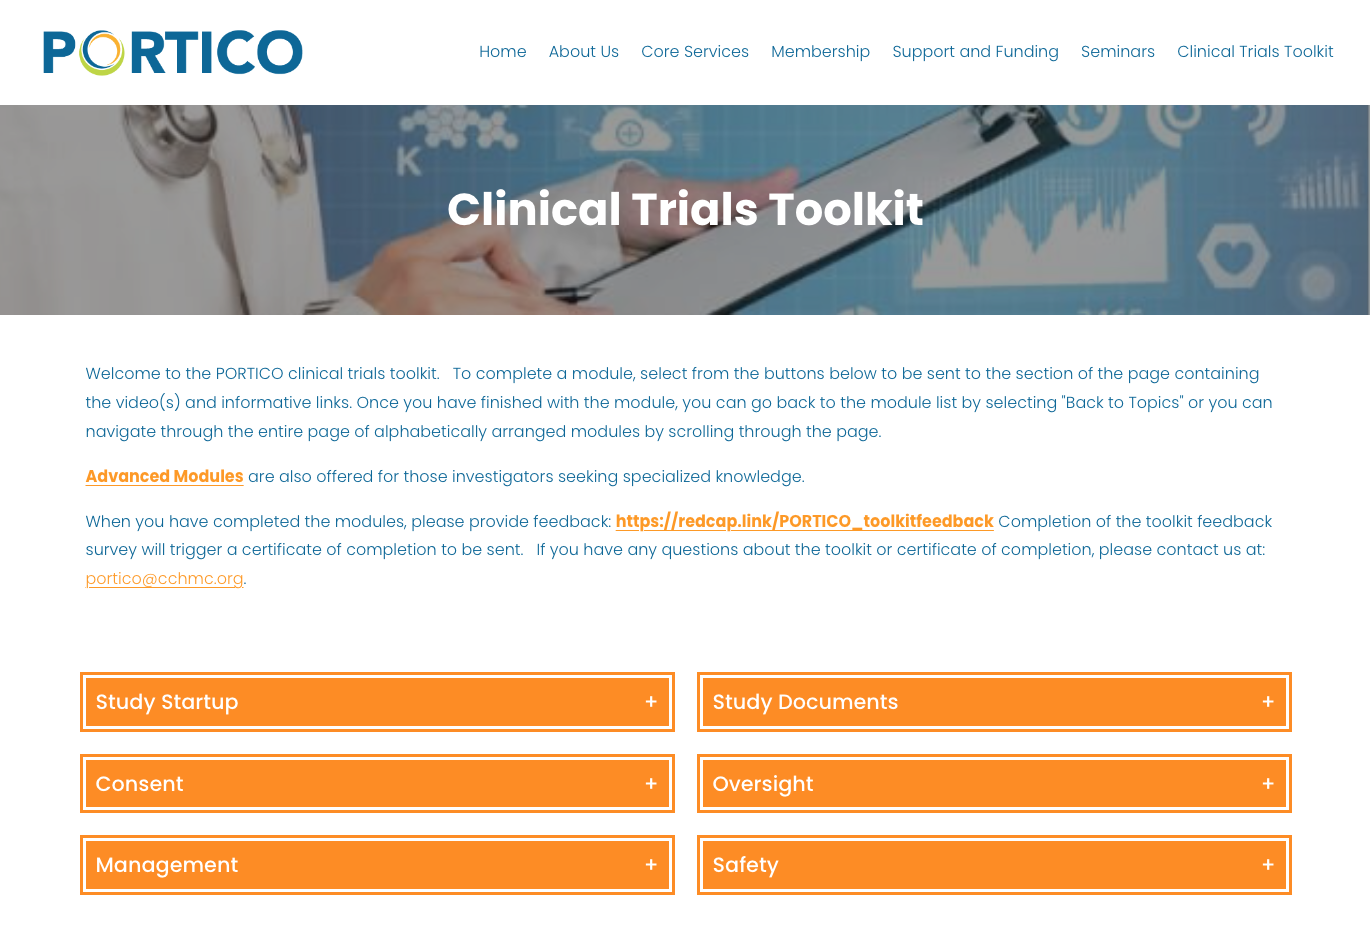 PORTICO Clinical Trials Toolkit